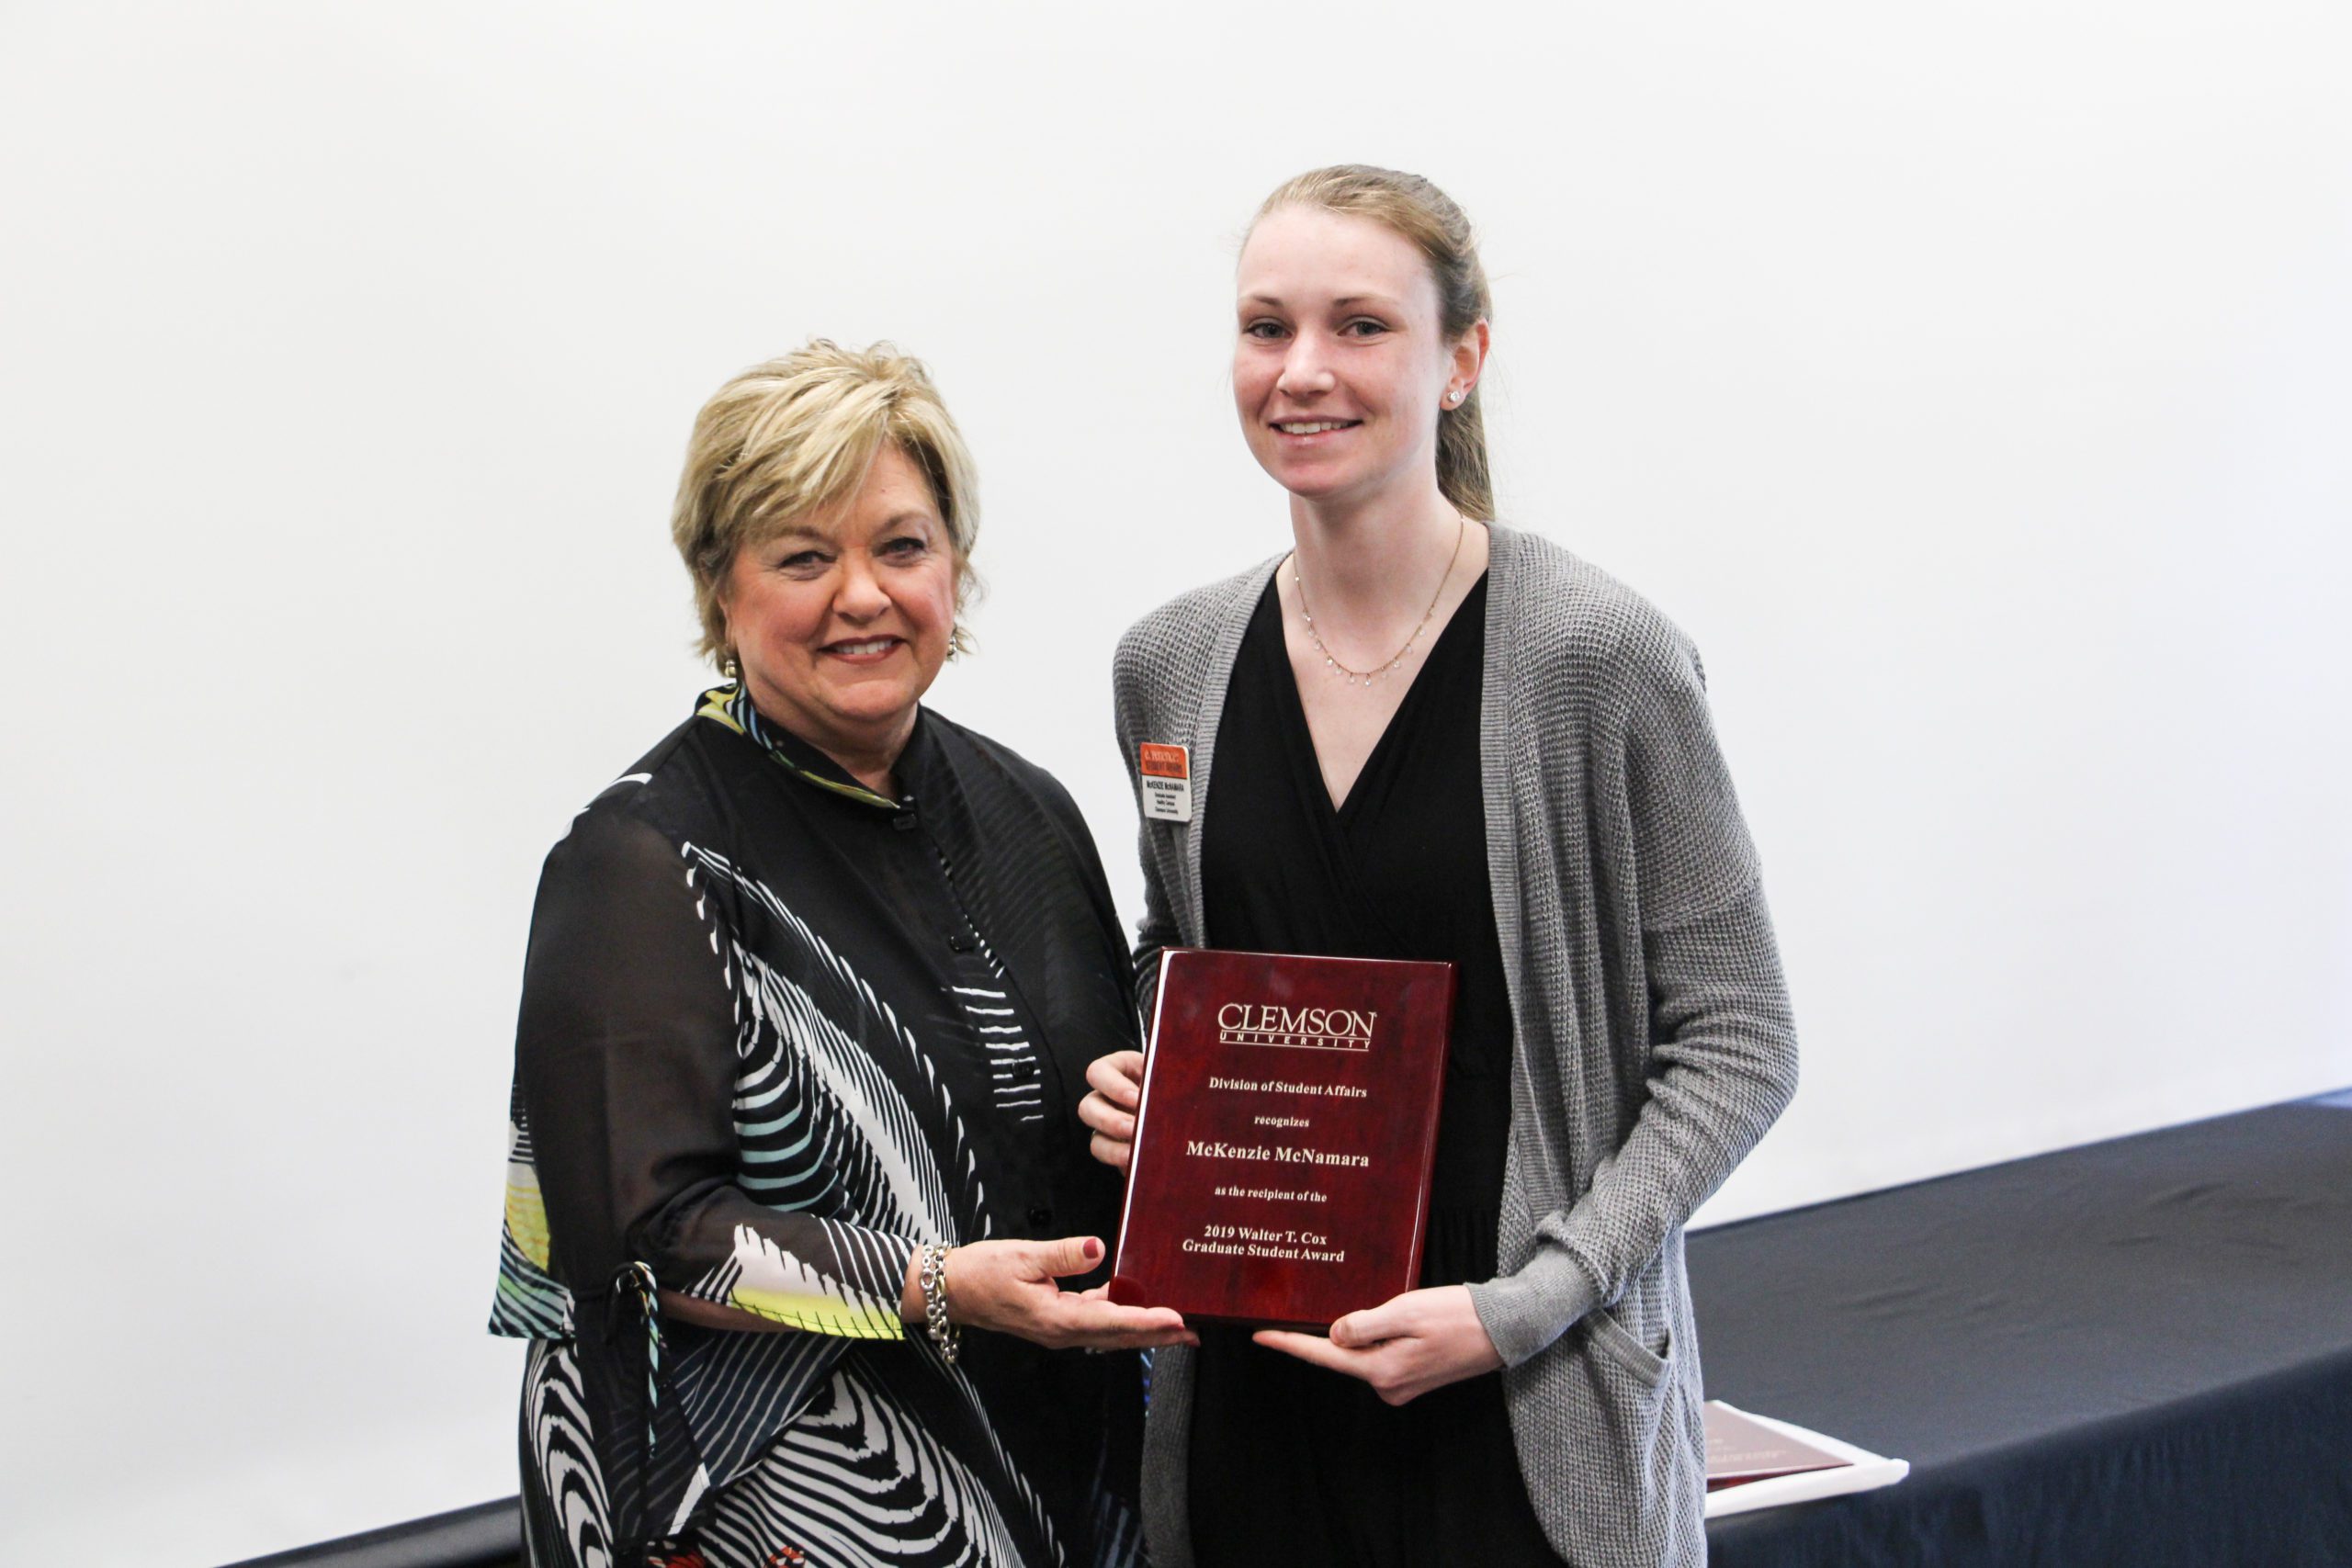 McKenzie McNamara (right) receives the 2019 Walter T. Cox Graduate Student Award from then Vice President for Student Affairs Almeda Jacks